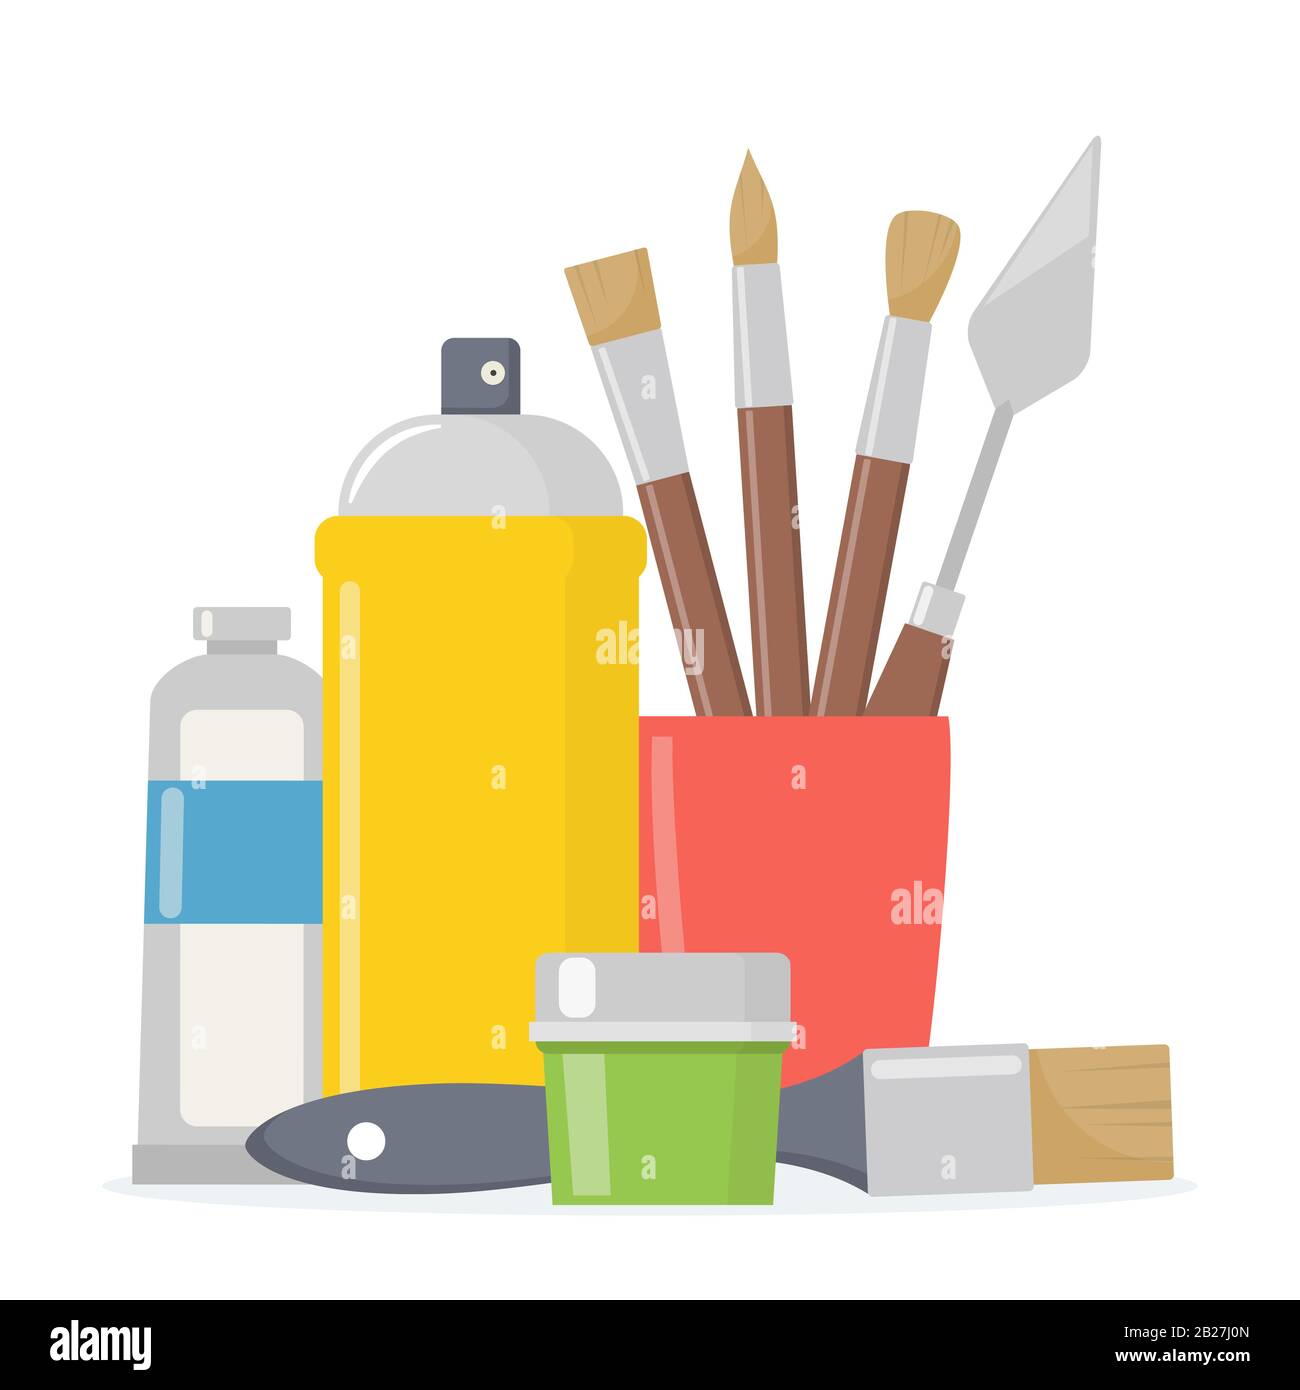 Art supply Stock Photos, Royalty Free Art supply Images